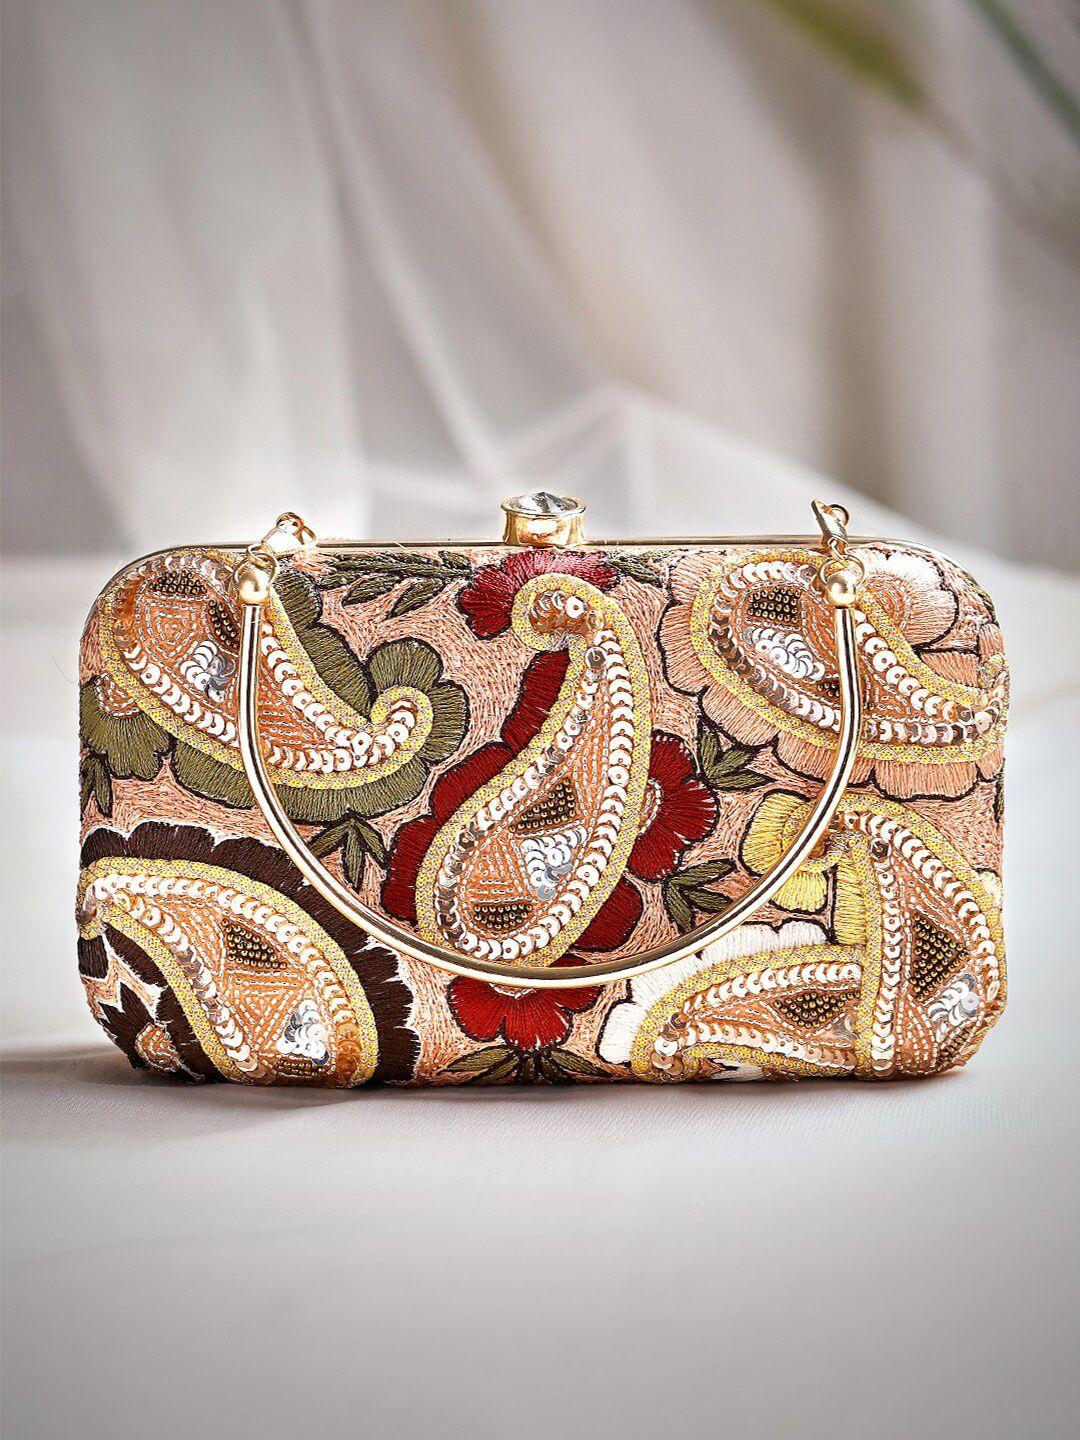 rubans gold-toned & red embroidered box clutch